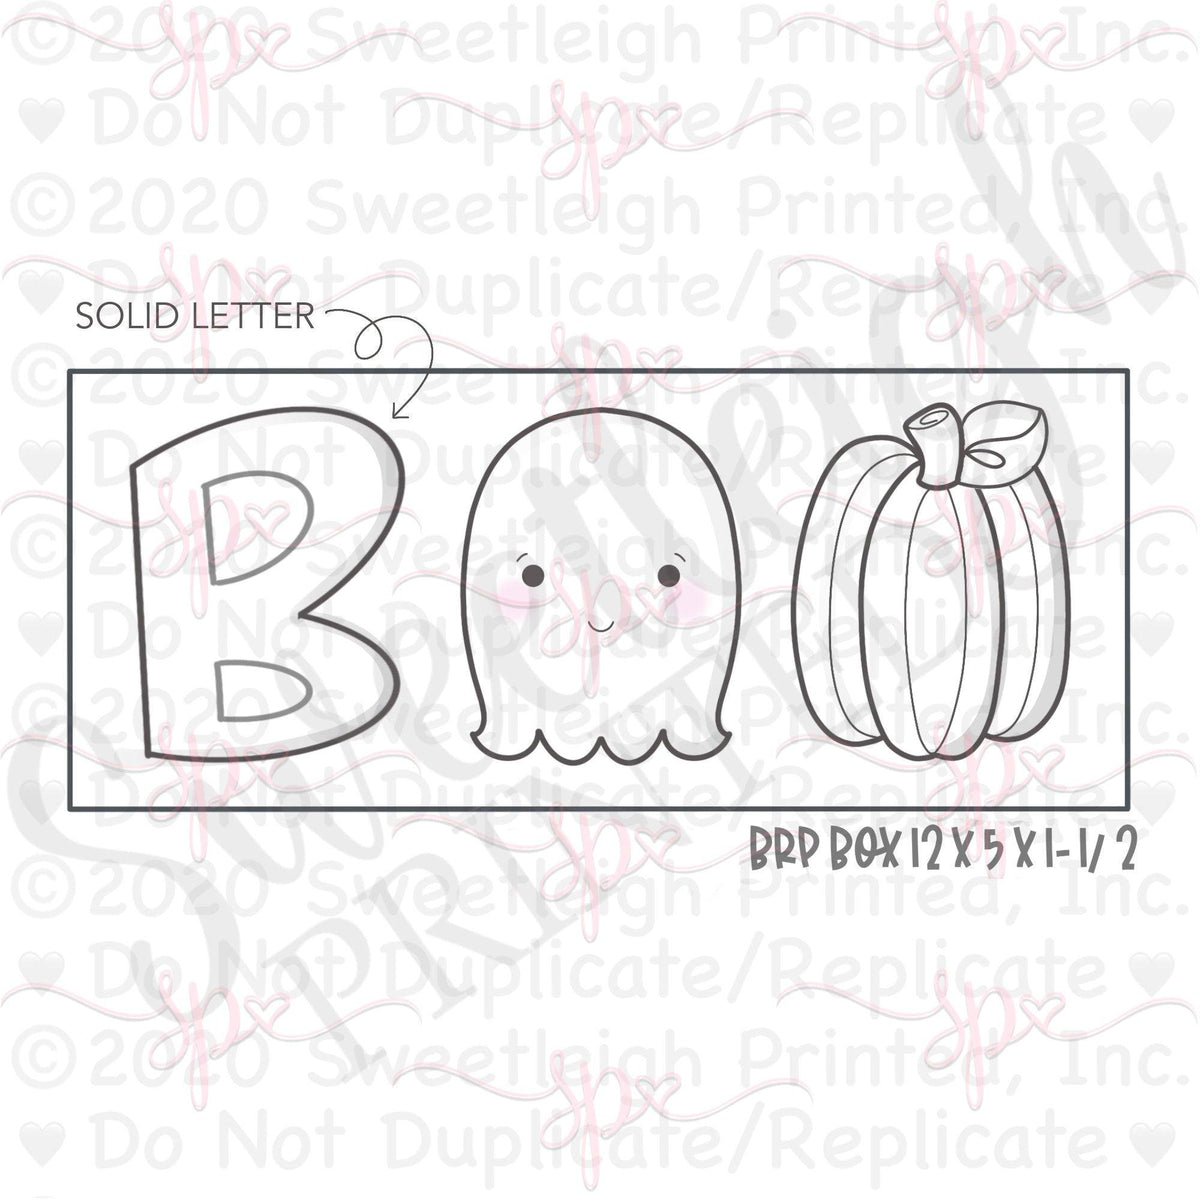 Boo Letter Cookie Cutter Set - Sweetleigh 